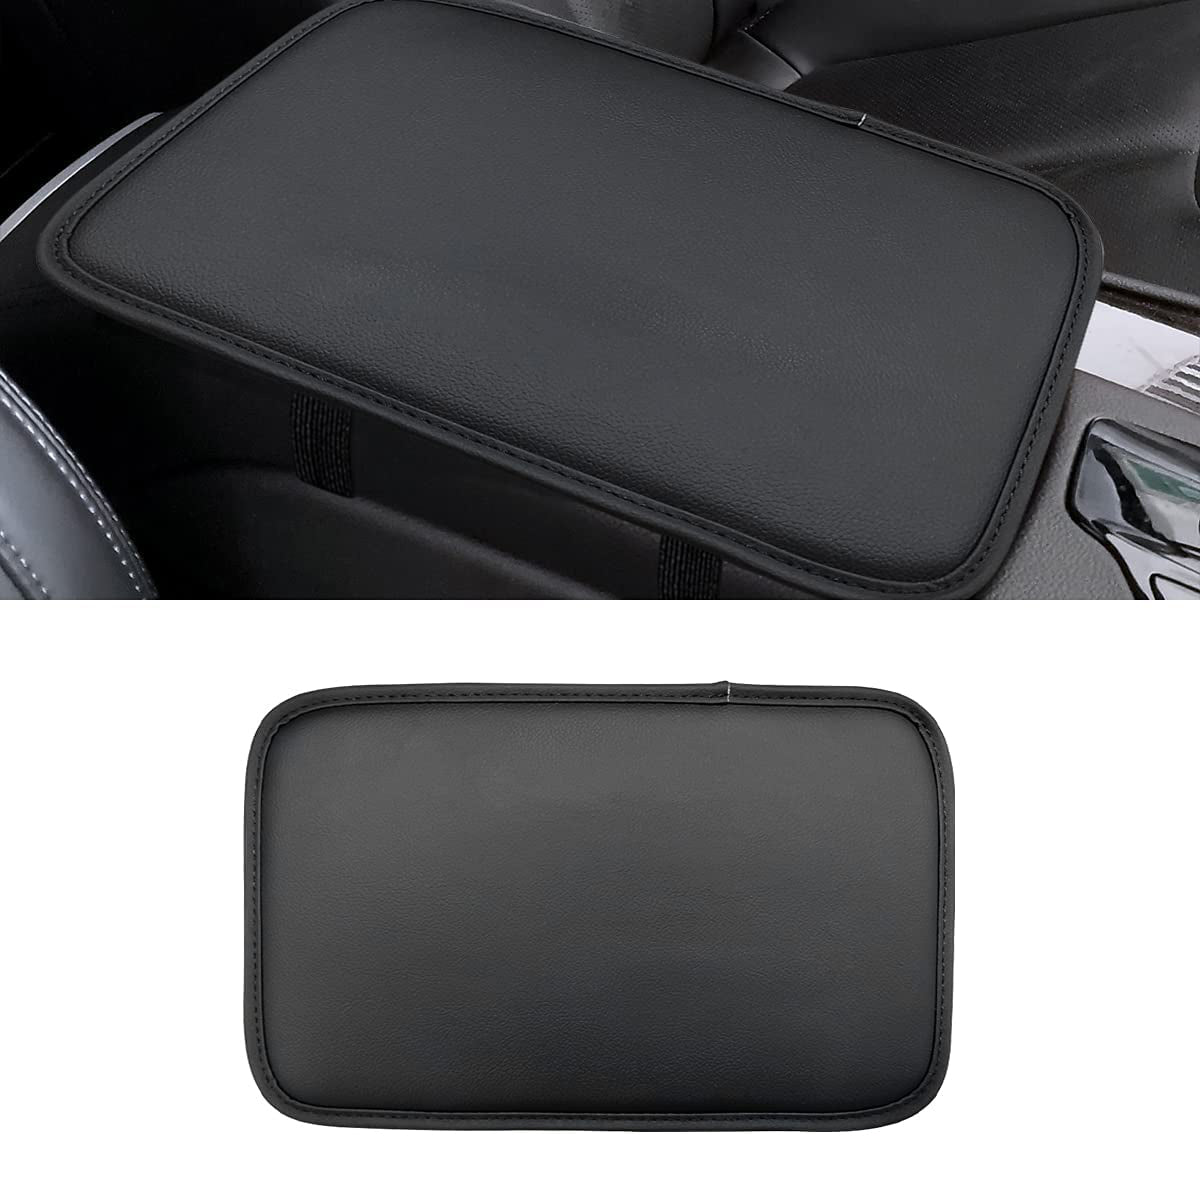 Leather Center Console Cushion Pad, Custom Fit For Your Cars, Waterproof Armrest Seat Box Cover Fit, Car Interior Protection Accessories, Car Accessories FJ13991